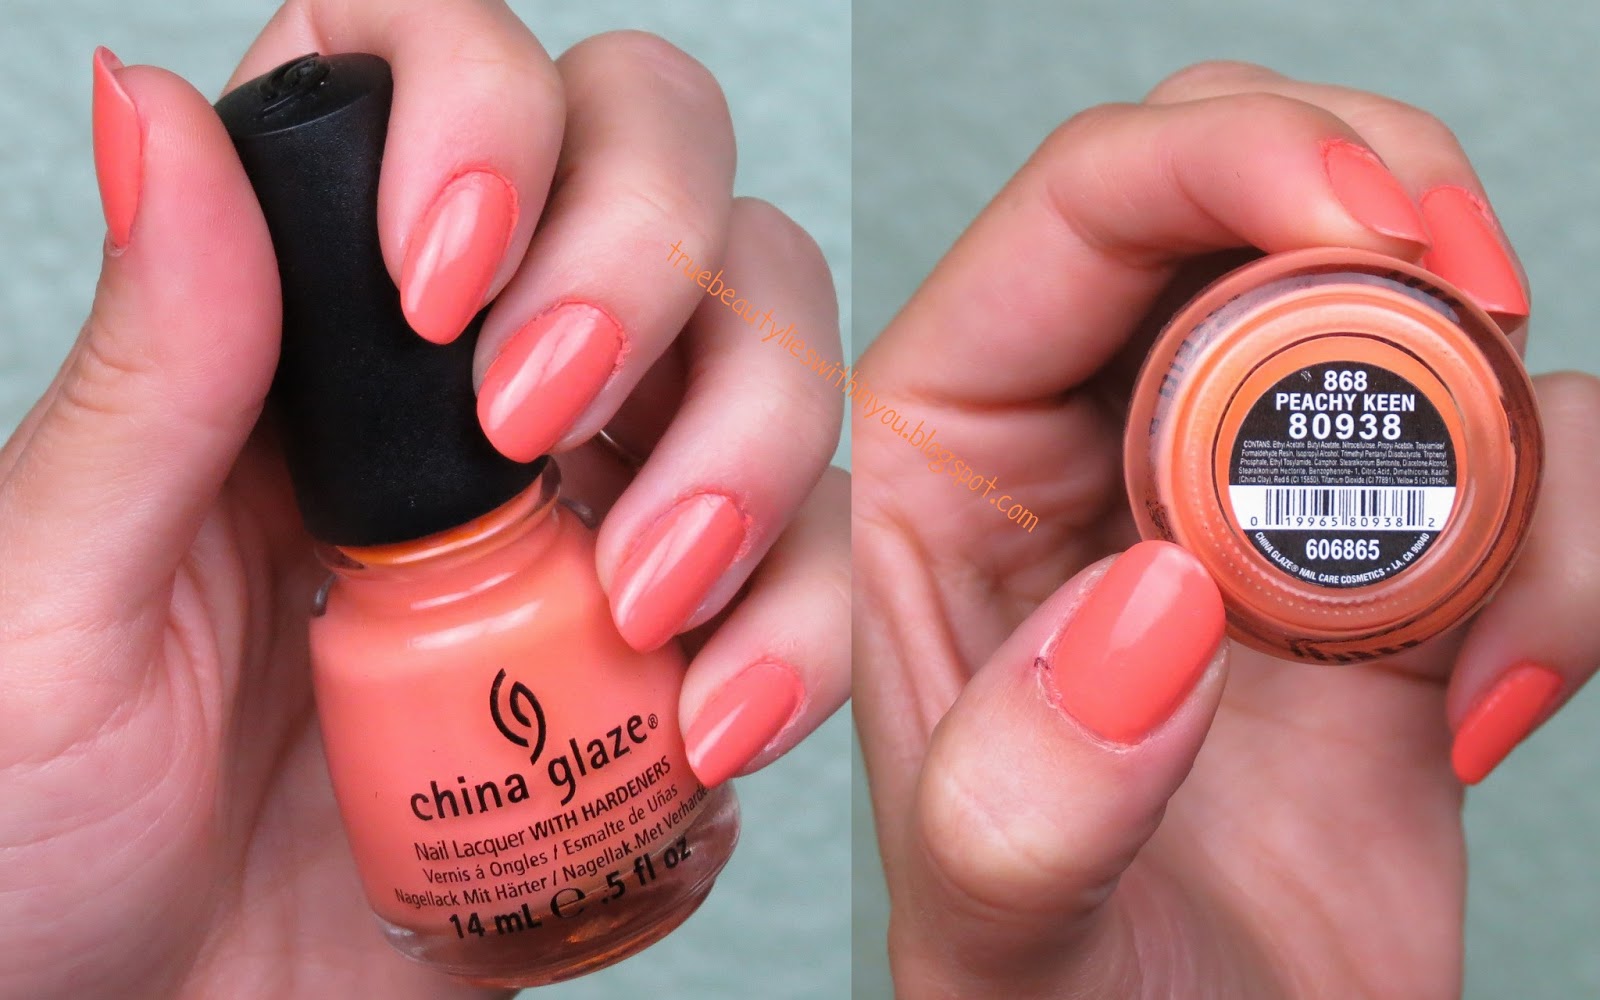 2. Cameo Color Nail Polish in "Peachy Keen" - wide 4